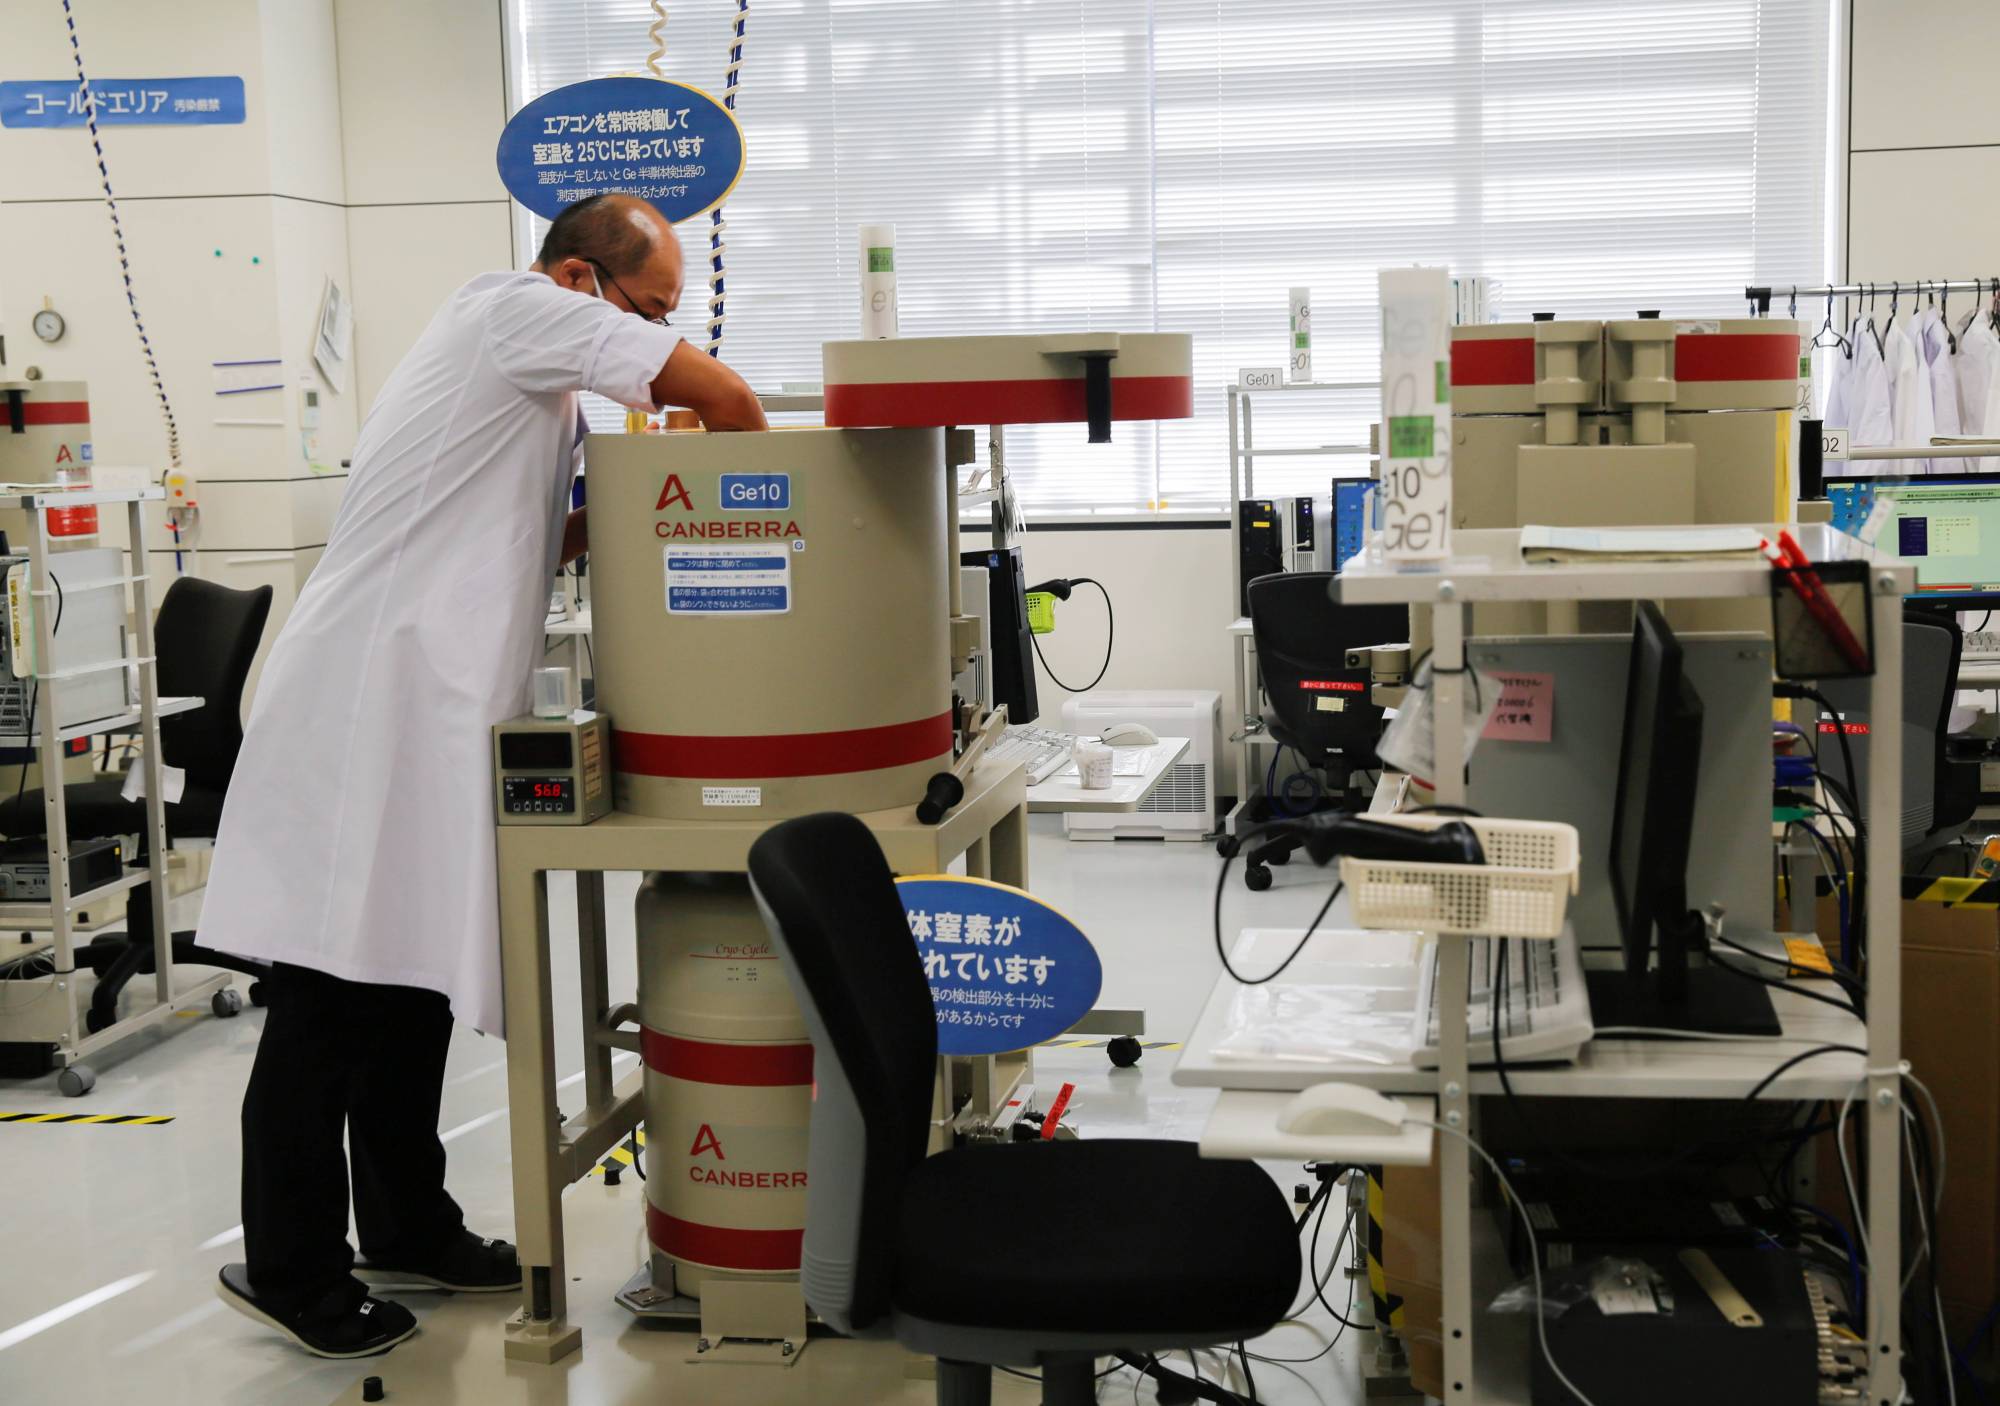 A laboratory technician prepares tests for cesium levels in beef from cattle bred in Fukushima, at Fukushima Agricultural Technology Center in Koriyama on Tuesday. | REUTERS